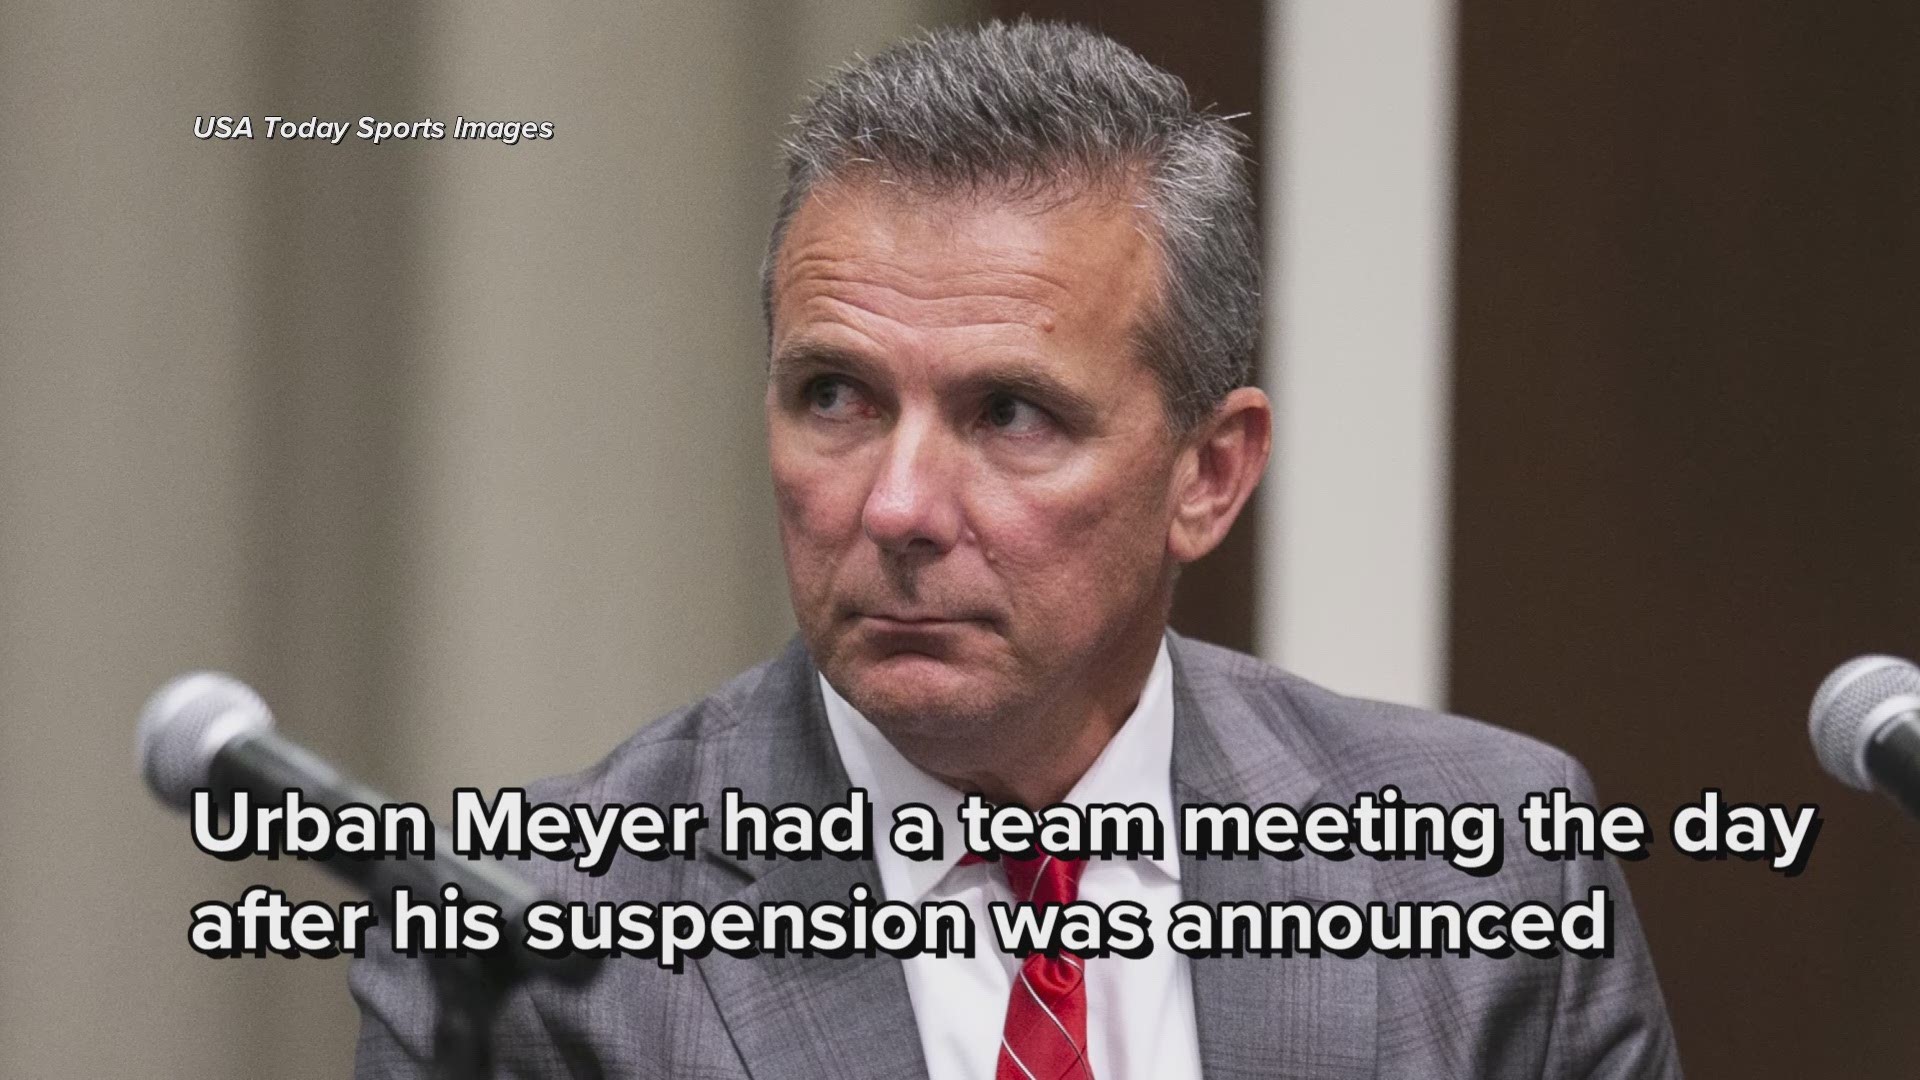 Ohio State: Urban Meyer met with team after suspension announced